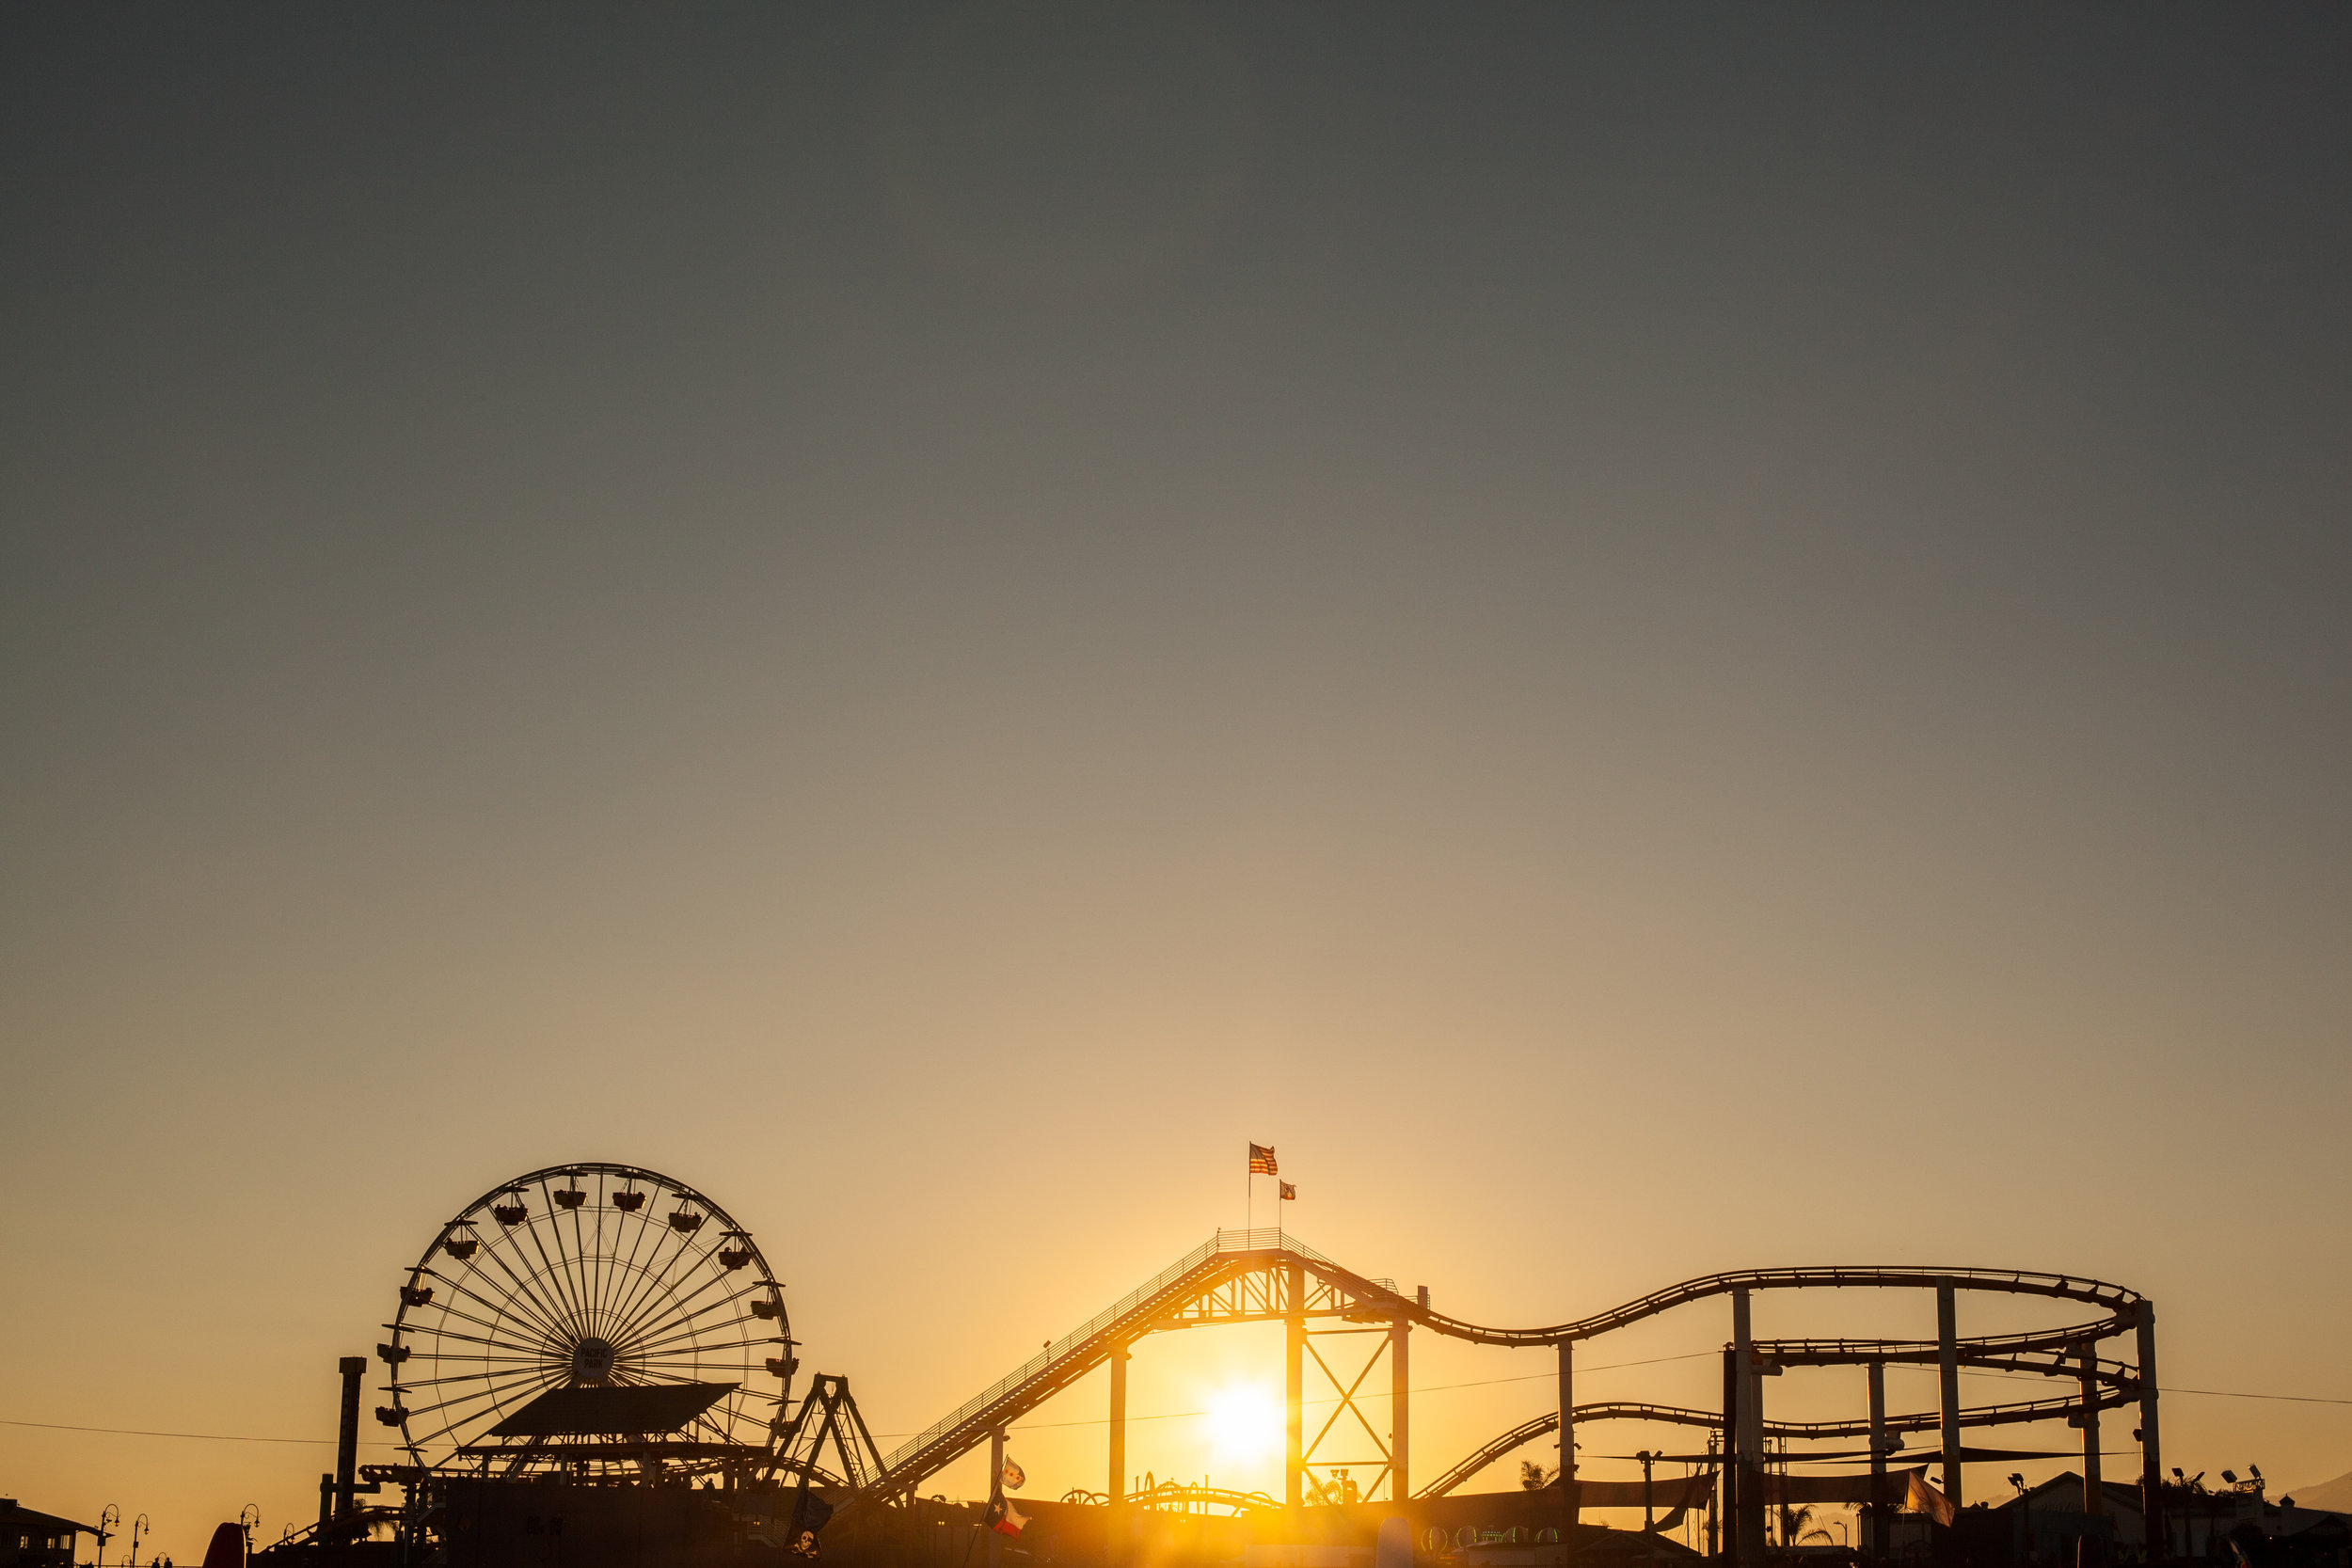 An artistic photo of the rollercoaster at Santa Monica Pier in California by Geraint Rowland.